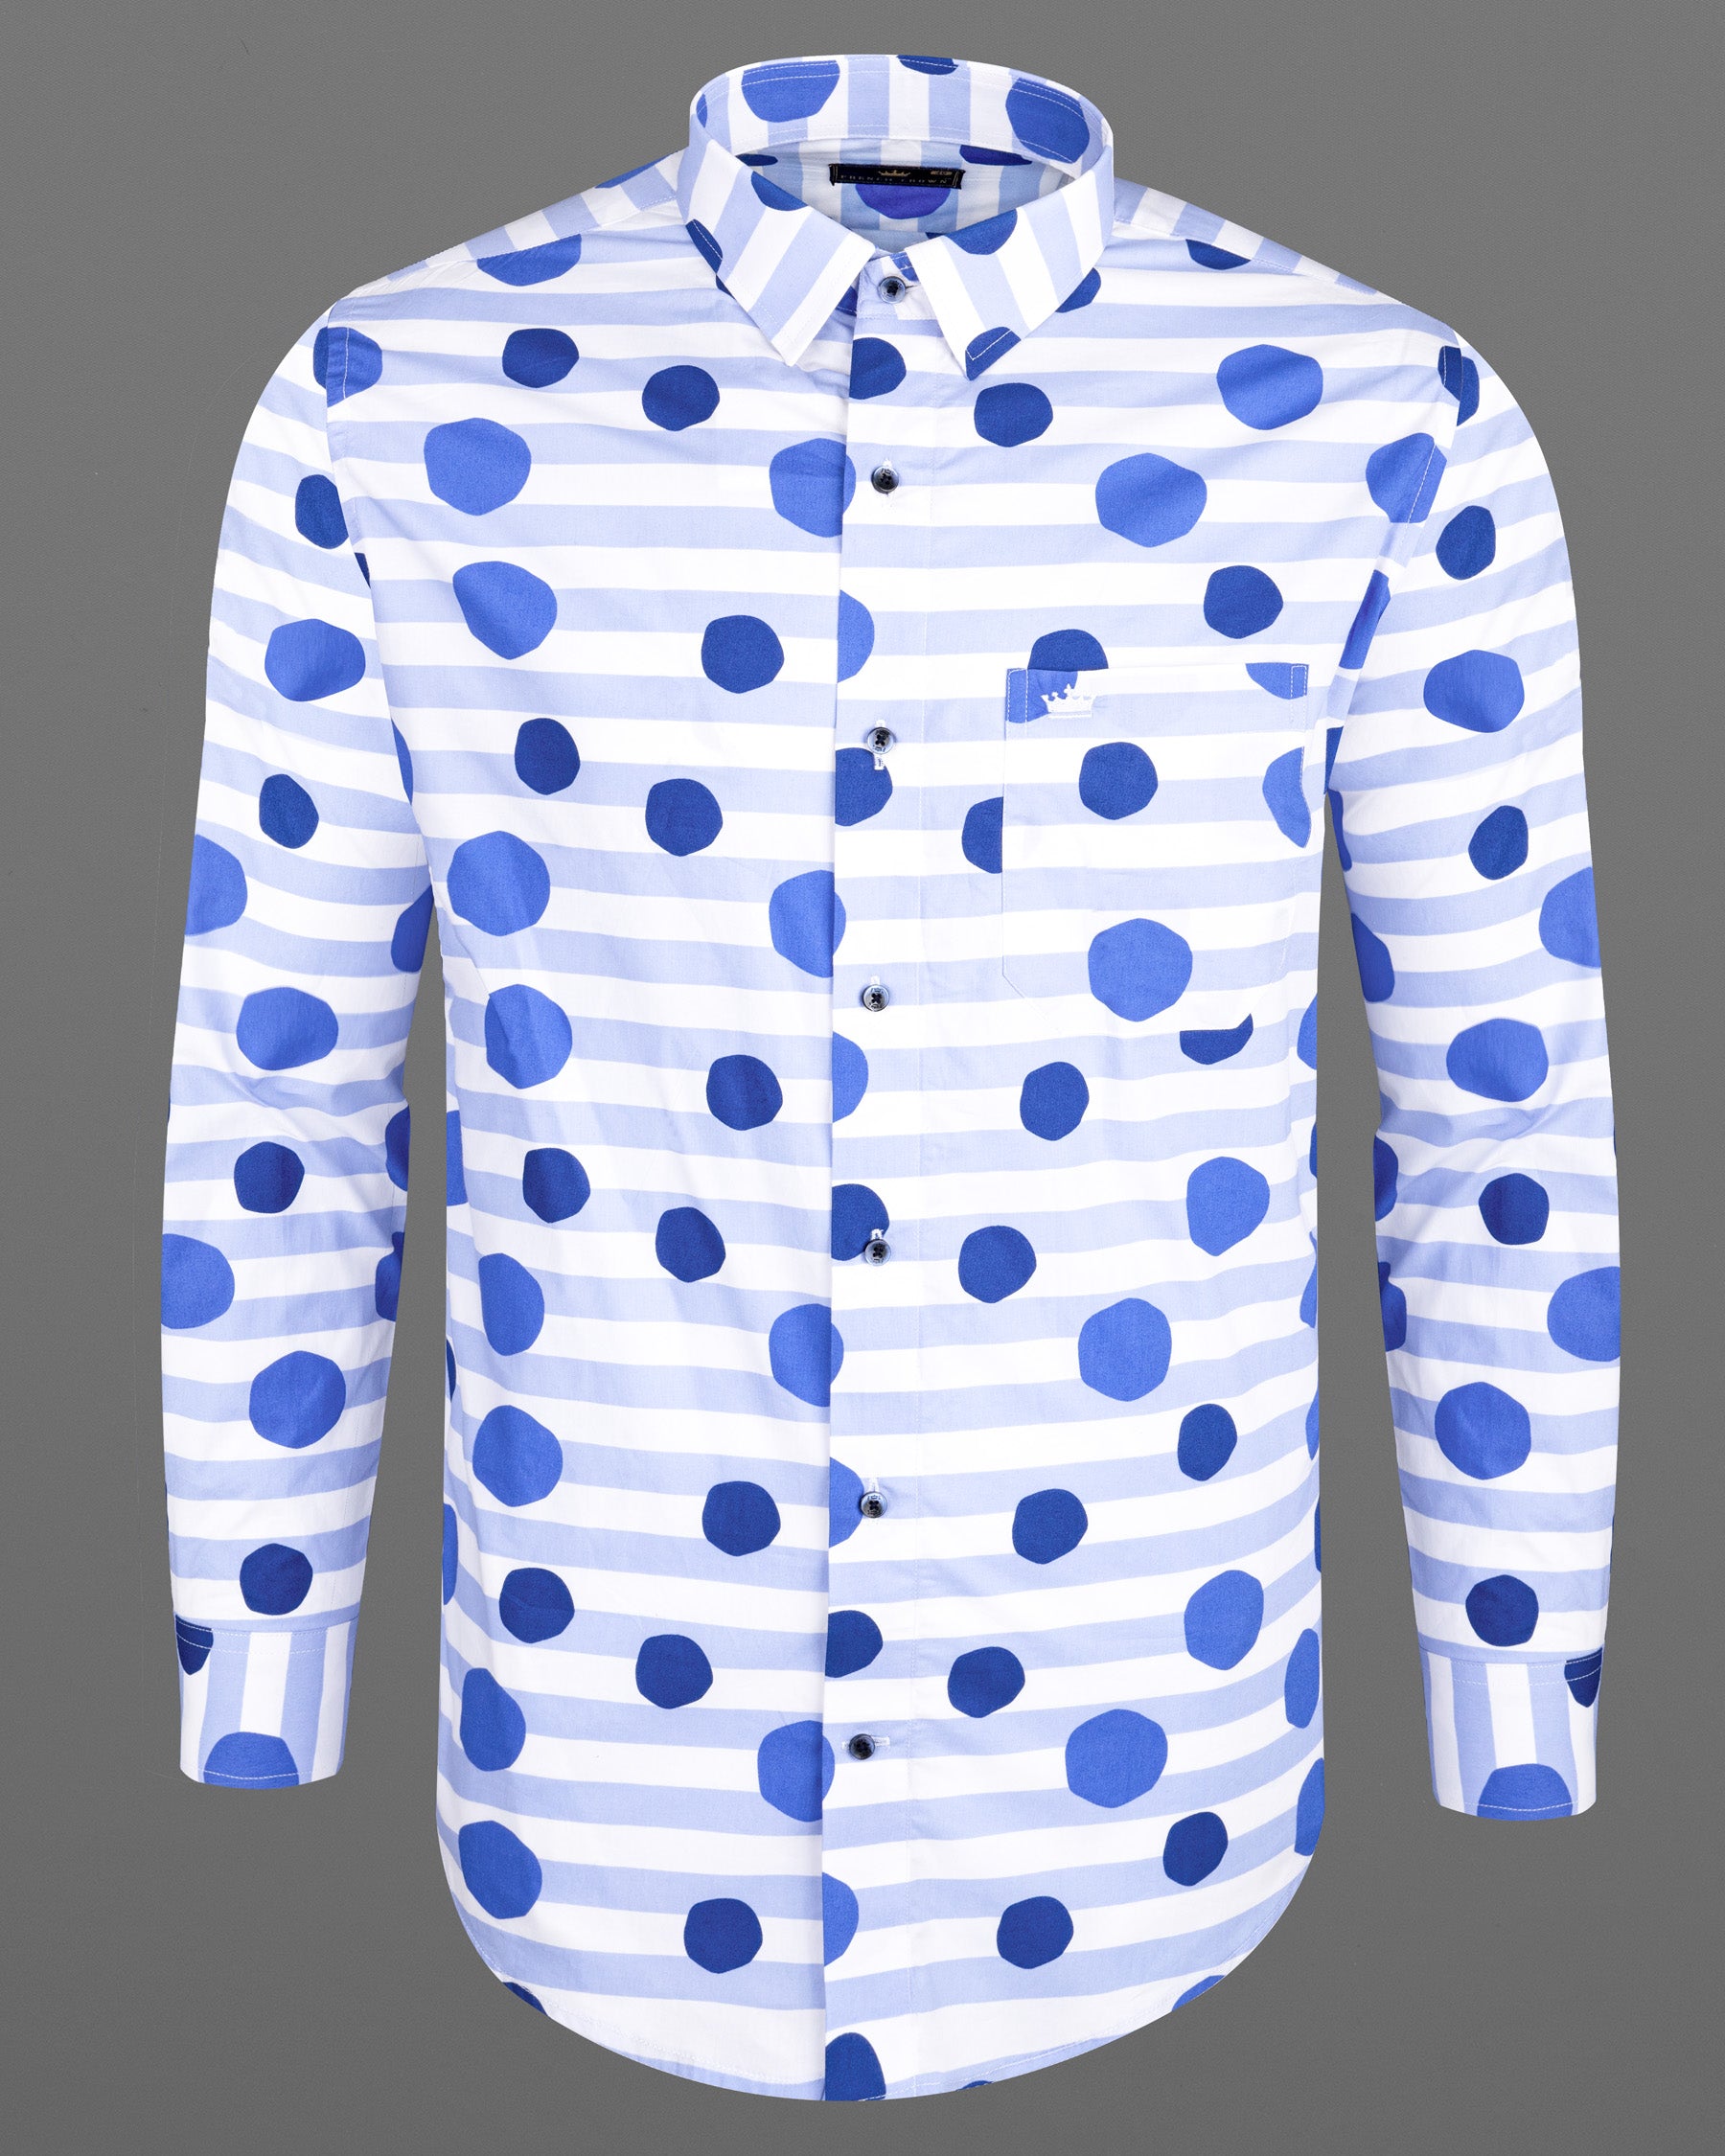 Moonraker with Polka Printed and Striped Premium Cotton Shirt 7011-BLE-38,7011-BLE-38,7011-BLE-39,7011-BLE-39,7011-BLE-40,7011-BLE-40,7011-BLE-42,7011-BLE-42,7011-BLE-44,7011-BLE-44,7011-BLE-46,7011-BLE-46,7011-BLE-48,7011-BLE-48,7011-BLE-50,7011-BLE-50,7011-BLE-52,7011-BLE-52